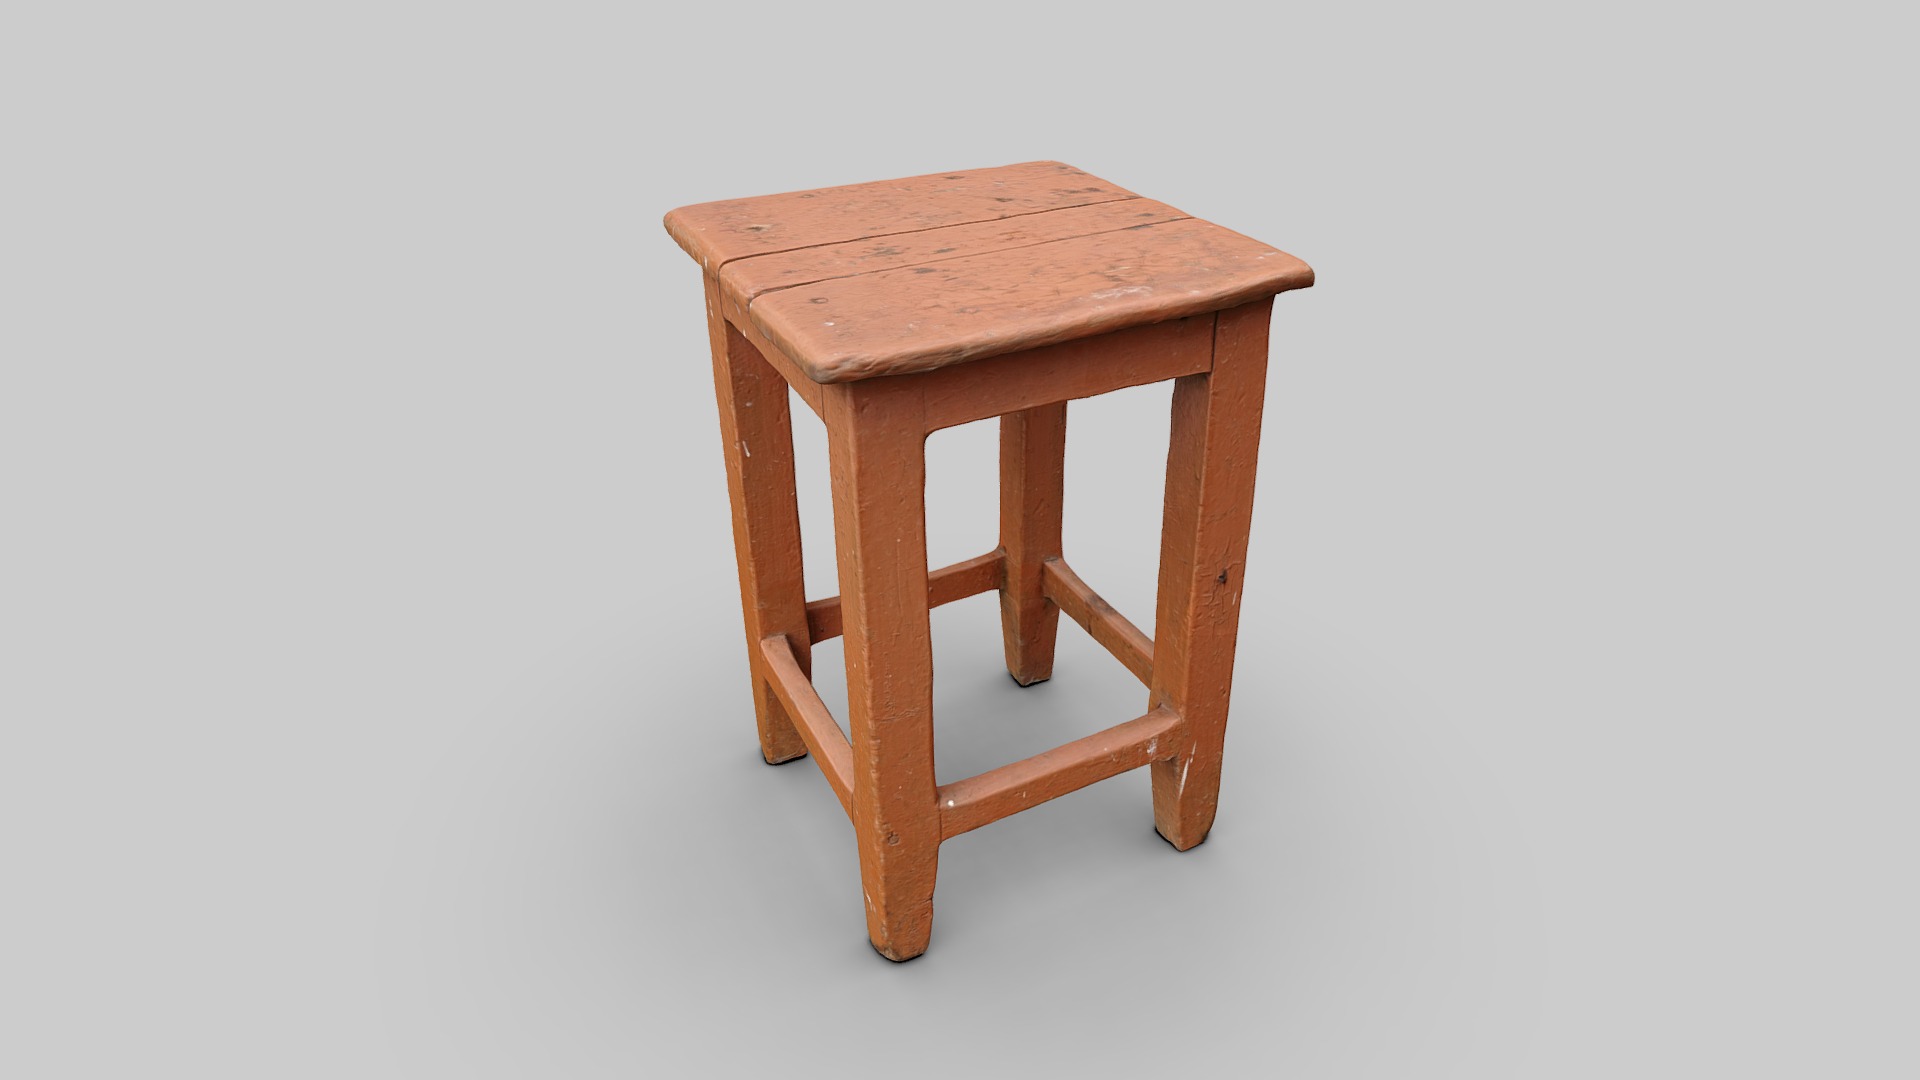 3D model Old wooden chair (RAW scan) - This is a 3D model of the Old wooden chair (RAW scan). The 3D model is about a wooden table with legs.